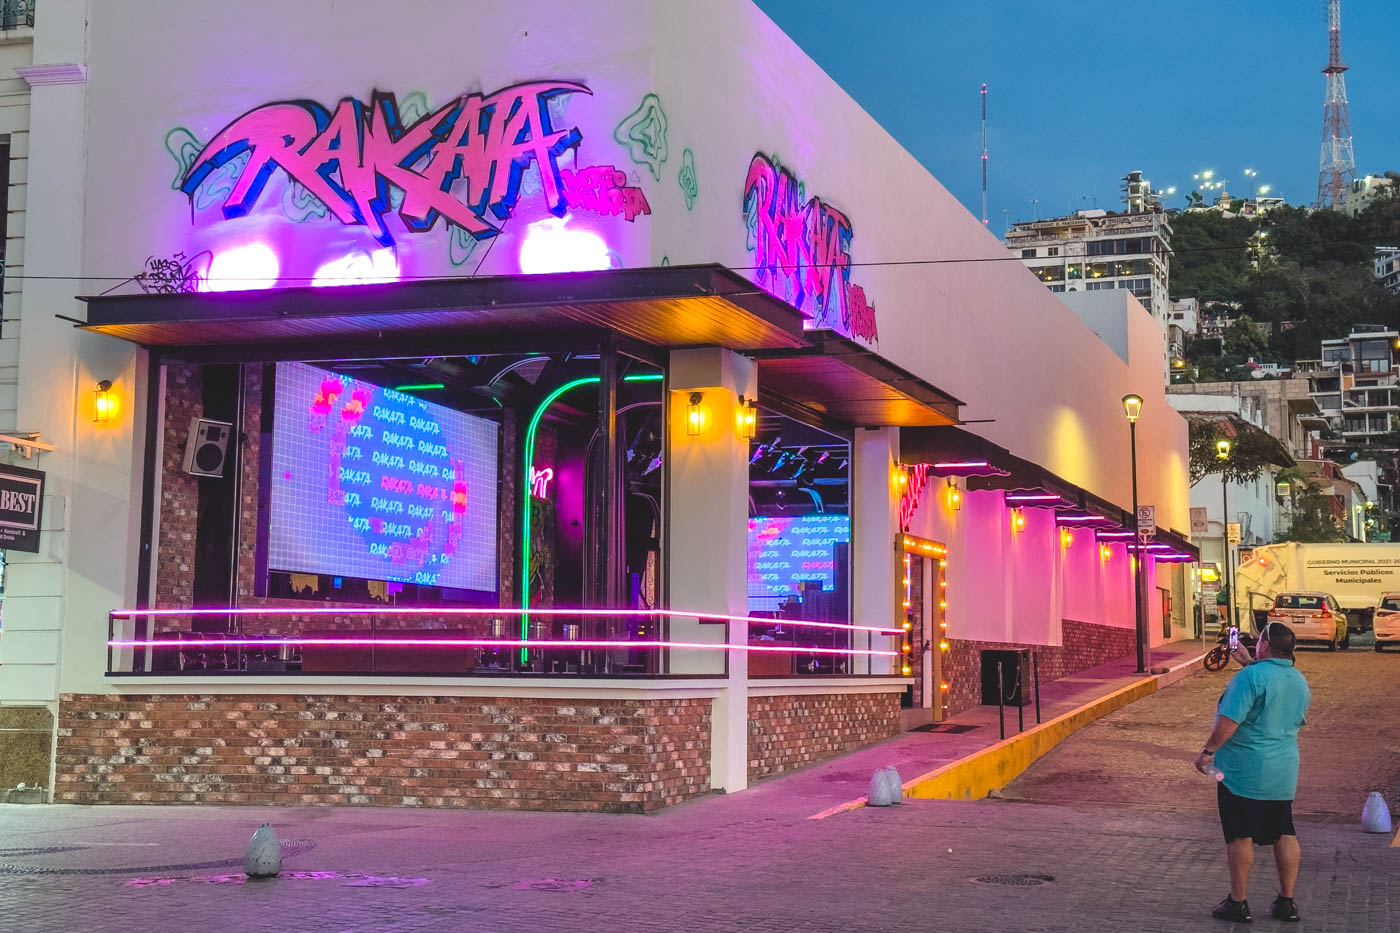 A club in Puerto Vallarta lit up in neon pink and a man in front taking a photo.